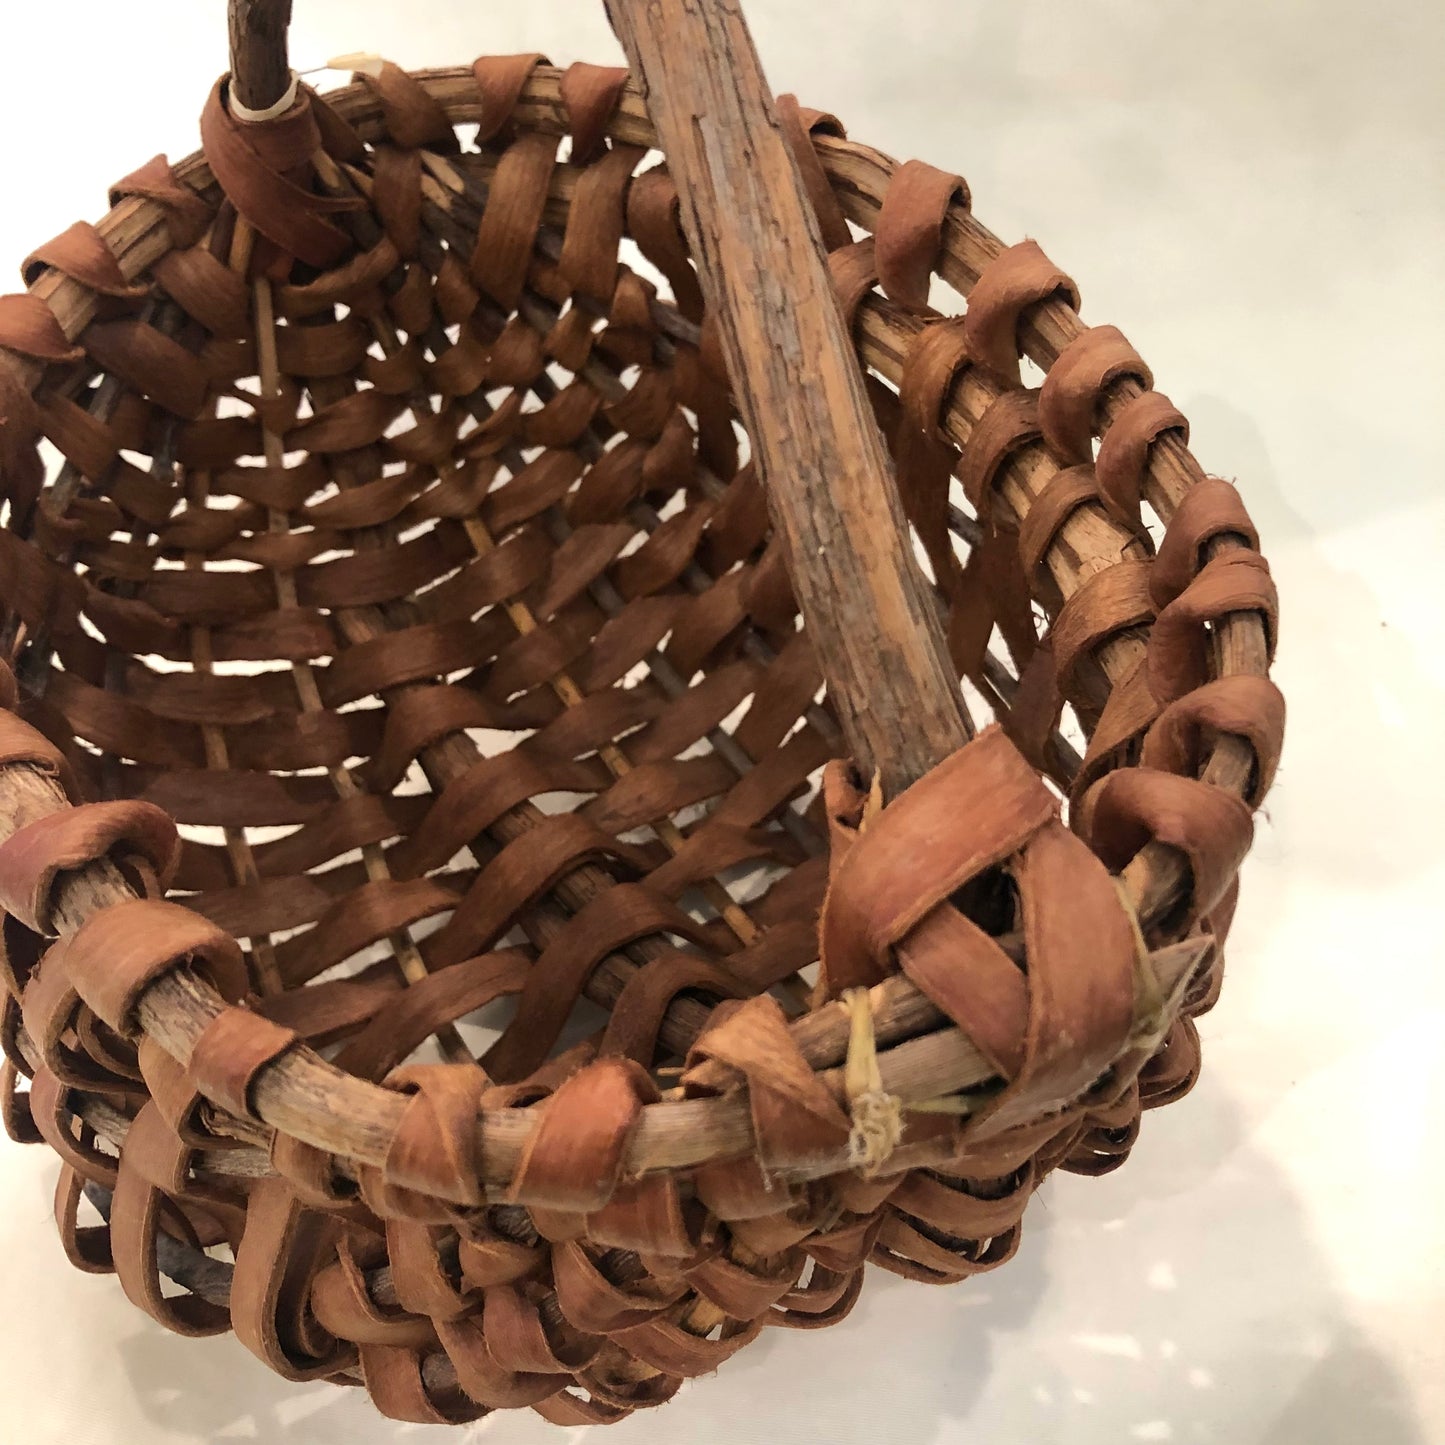 Basket, Vintage, Woven of Leather and Vines